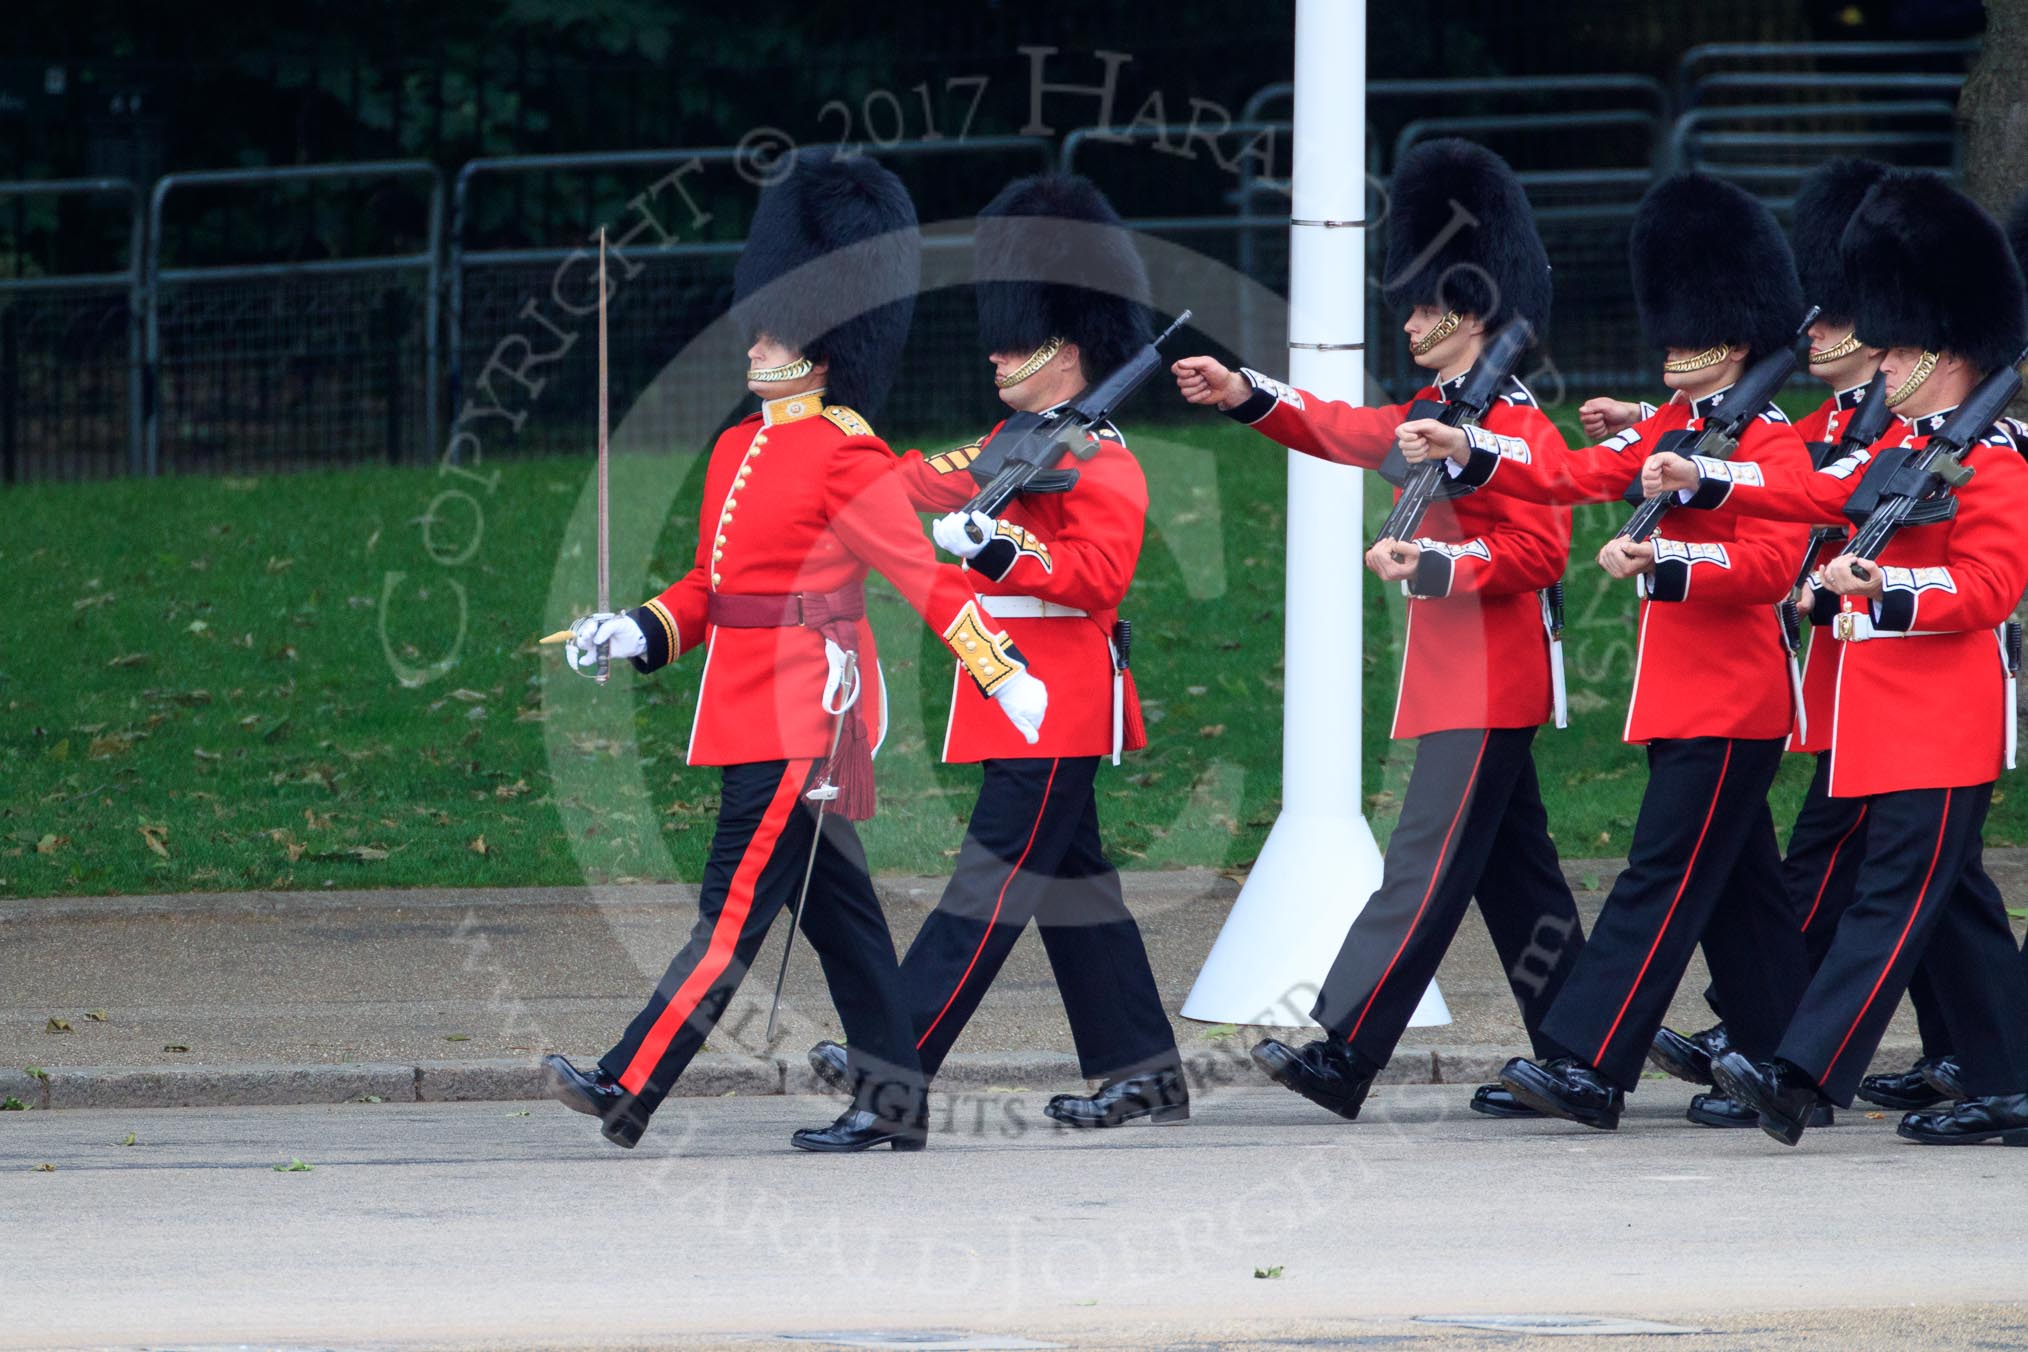 during The Colonel's Review {iptcyear4} (final rehearsal for Trooping the Colour, The Queen's Birthday Parade)  at Horse Guards Parade, Westminster, London, 2 June 2018, 10:28.